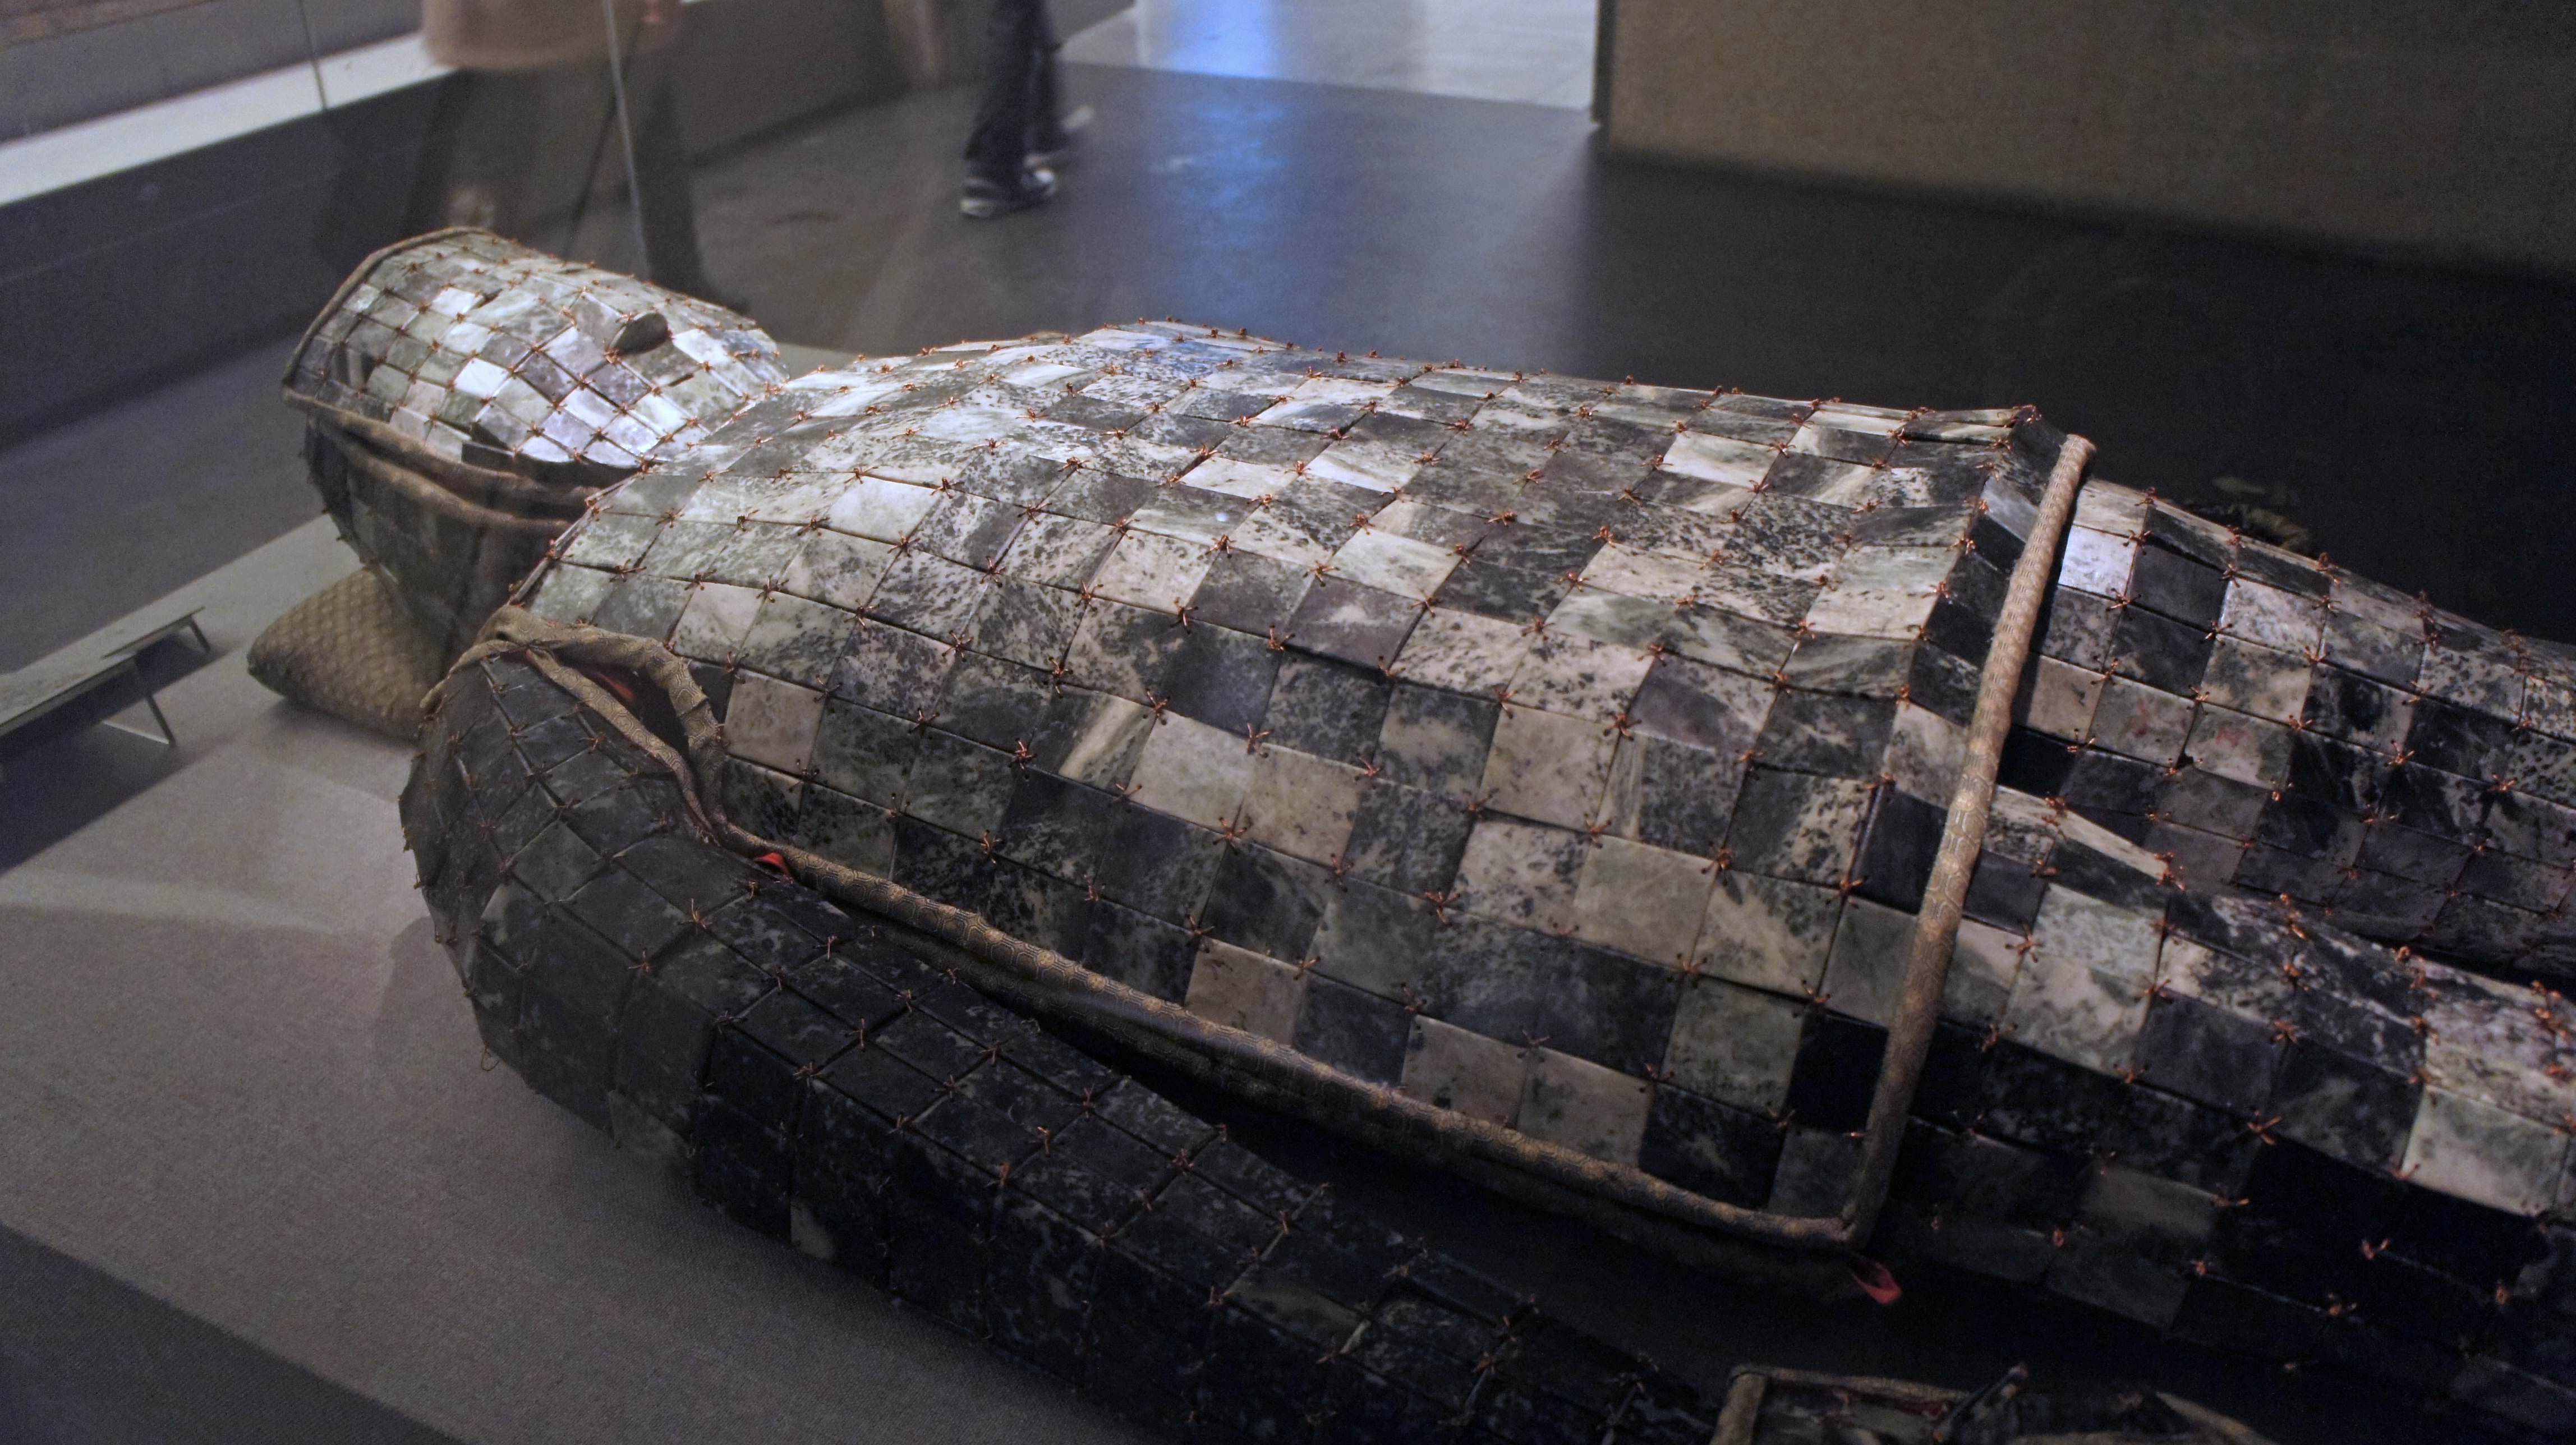 An angular shot of brown and skin-colored metal jade burial suit on a grey surface